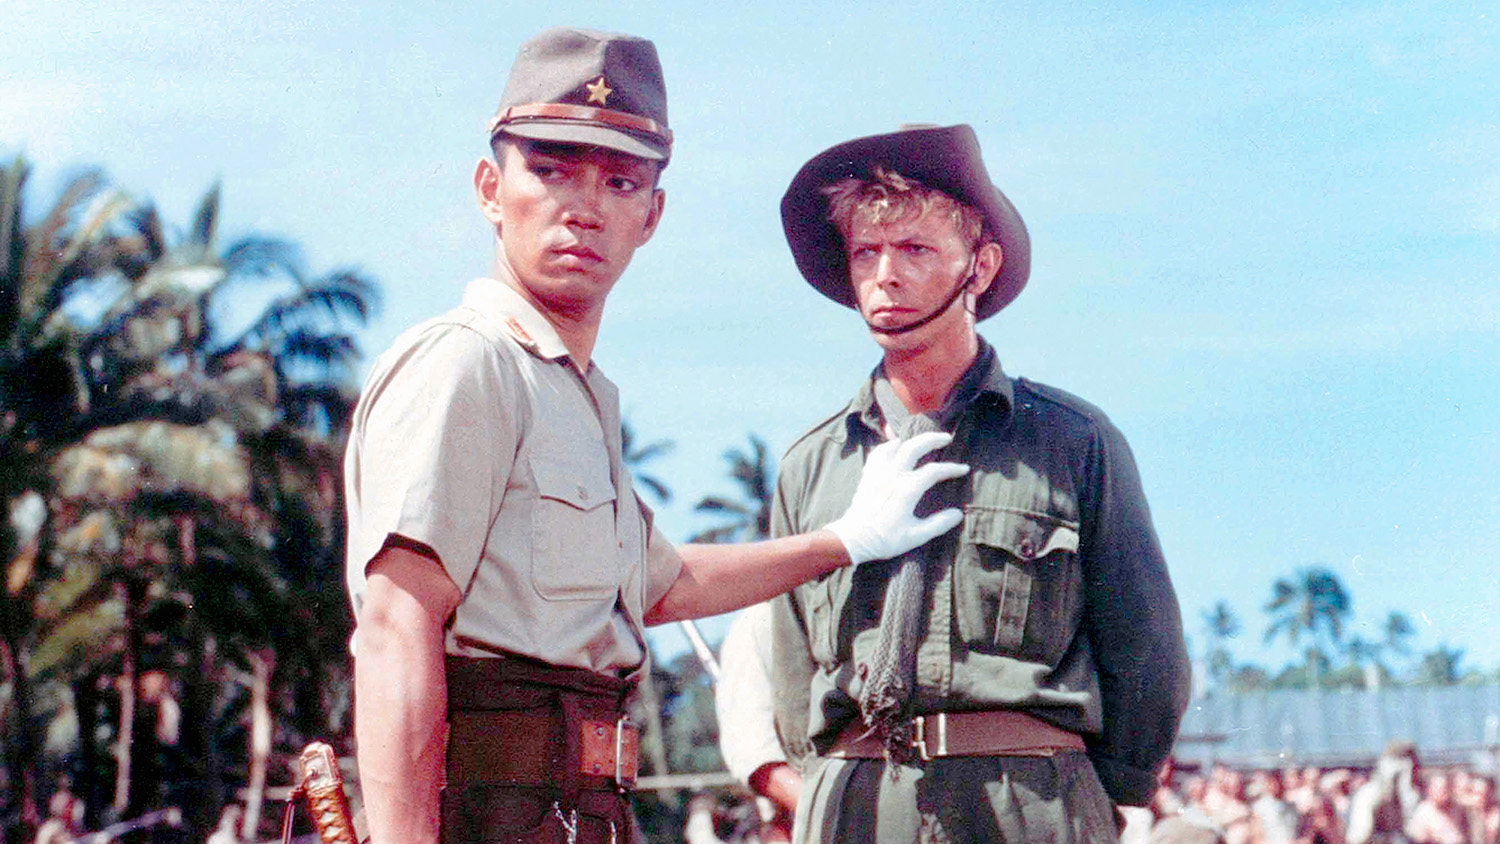 MERRY CHRISTMAS MR. LAWRENCE | SWAG HOMMES